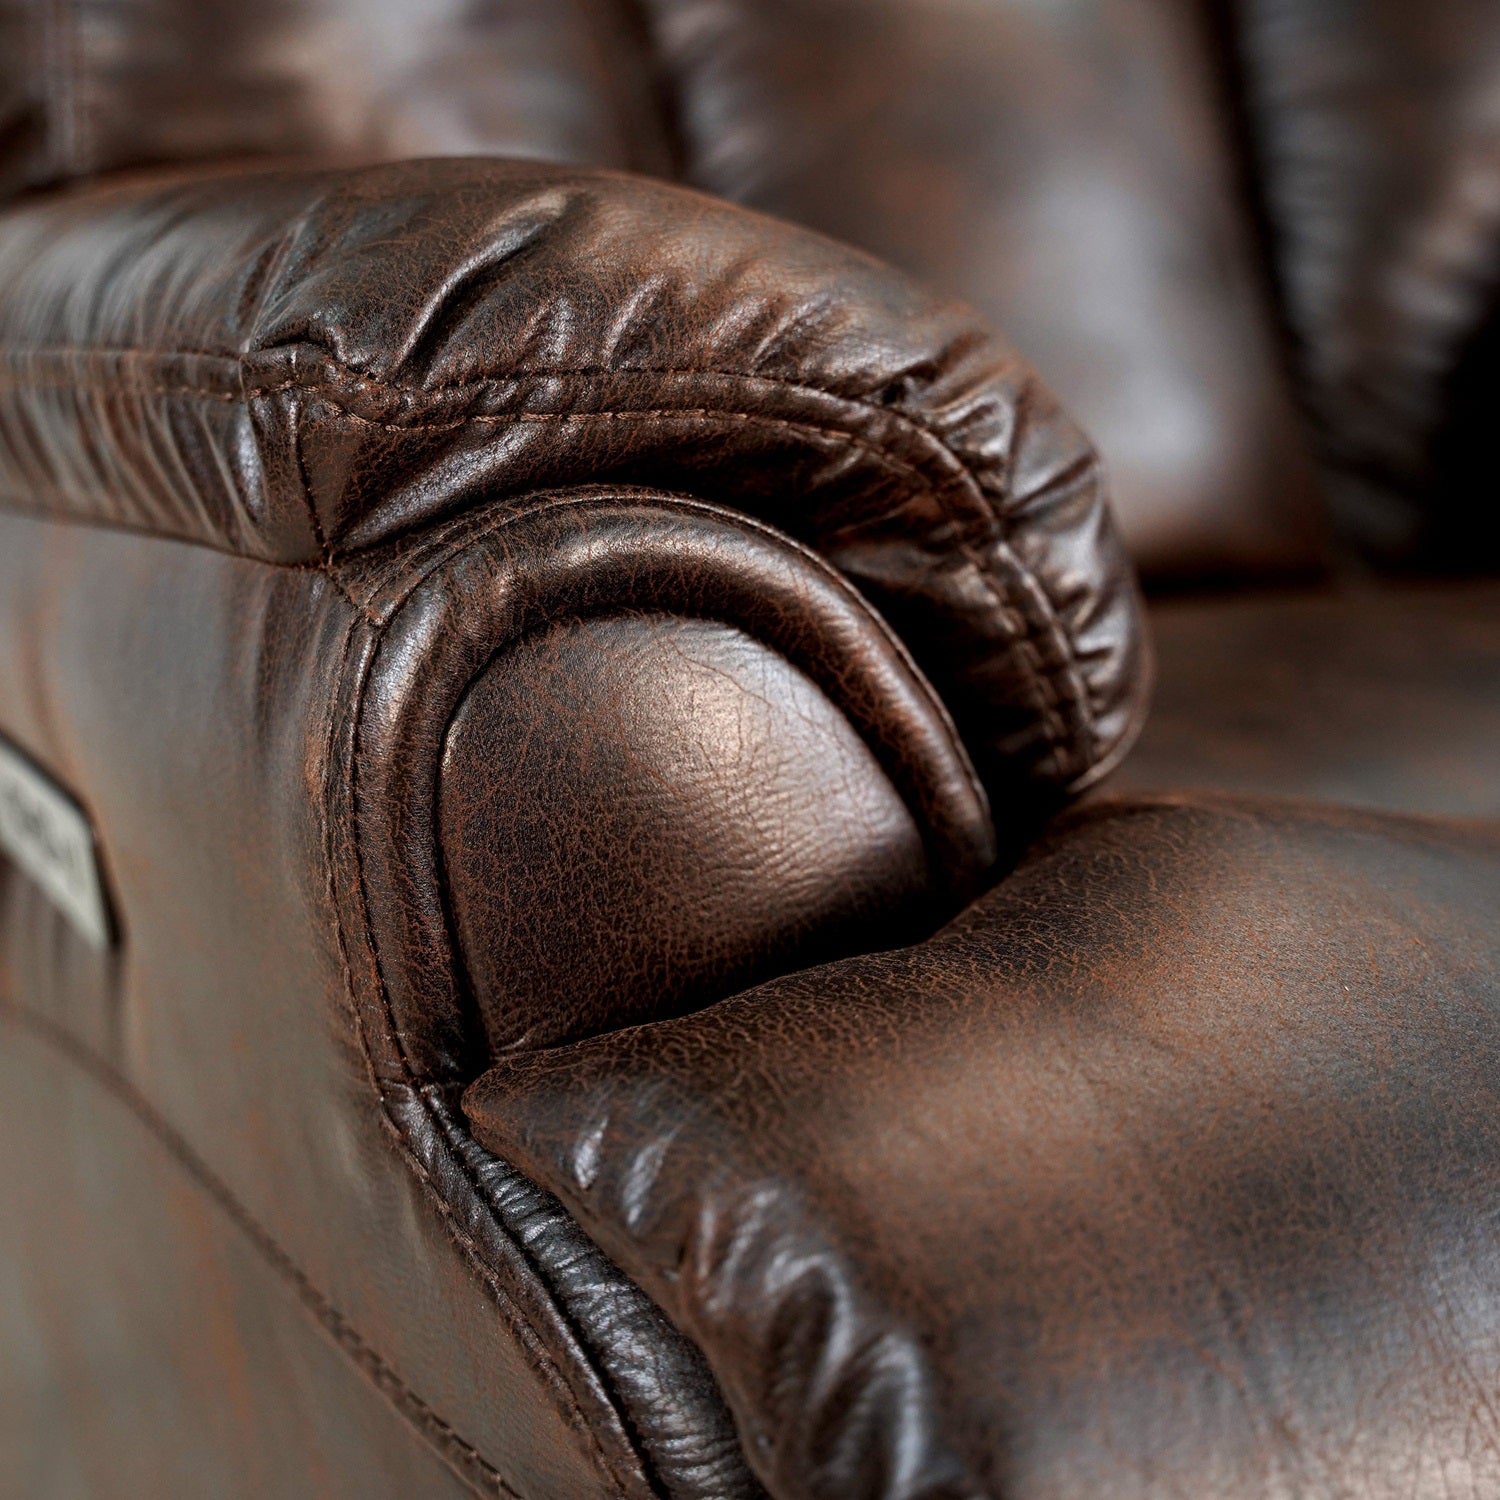 1st Choice Furniture Direct Power Motion Recliner 1st Choice Leather Gel Power Recliner with Headrest in Brown Finish